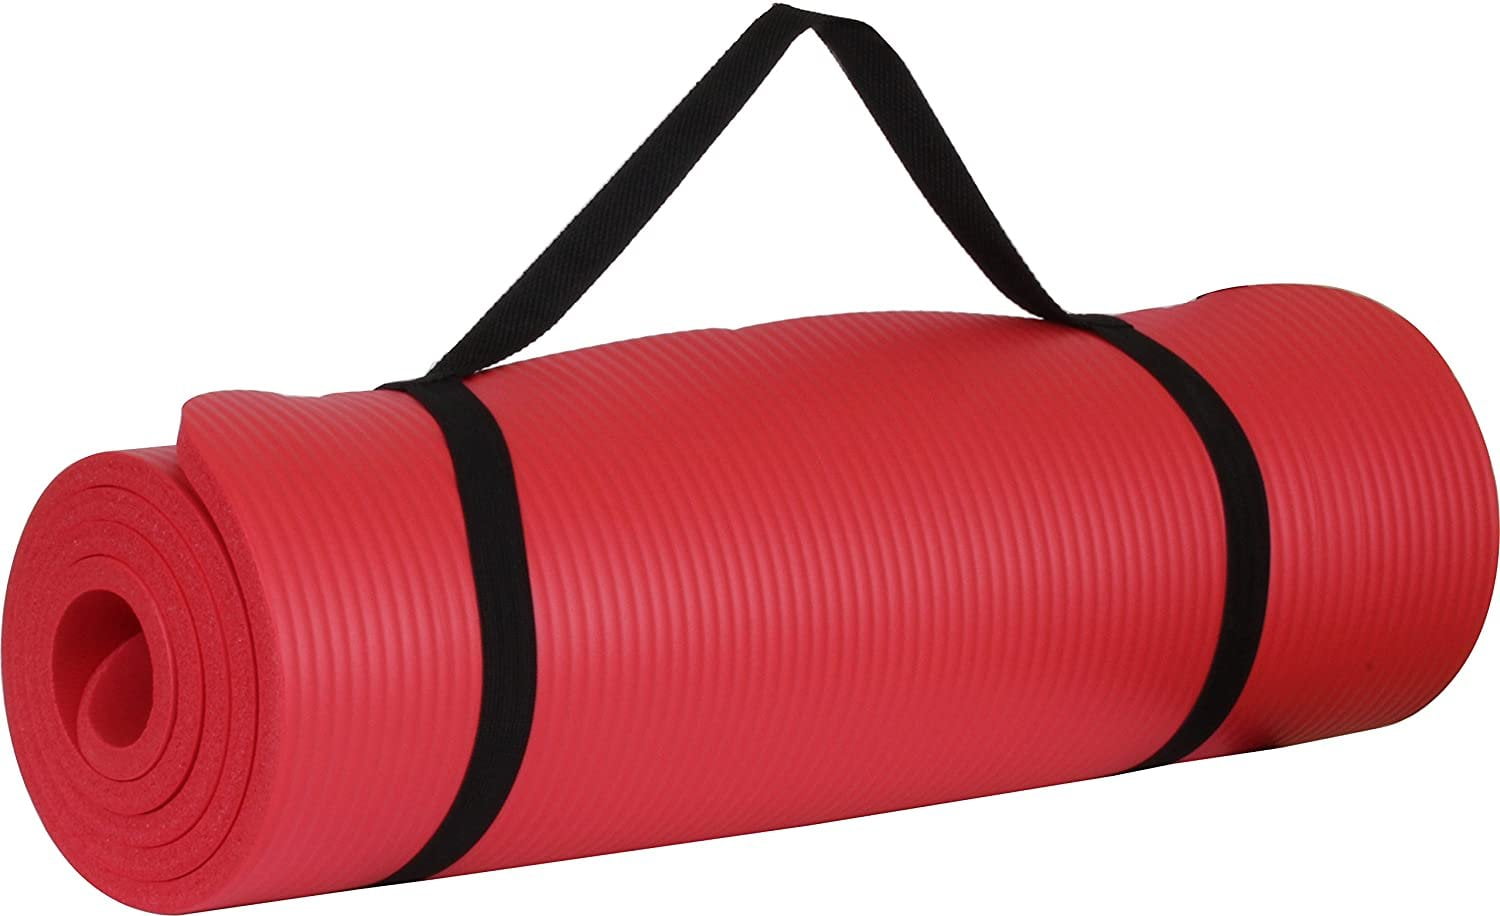 Yoga mat 72 X 24 - Extra Thick Exercise Mat - with Carrying Strap for  Travel Yoga Mat 